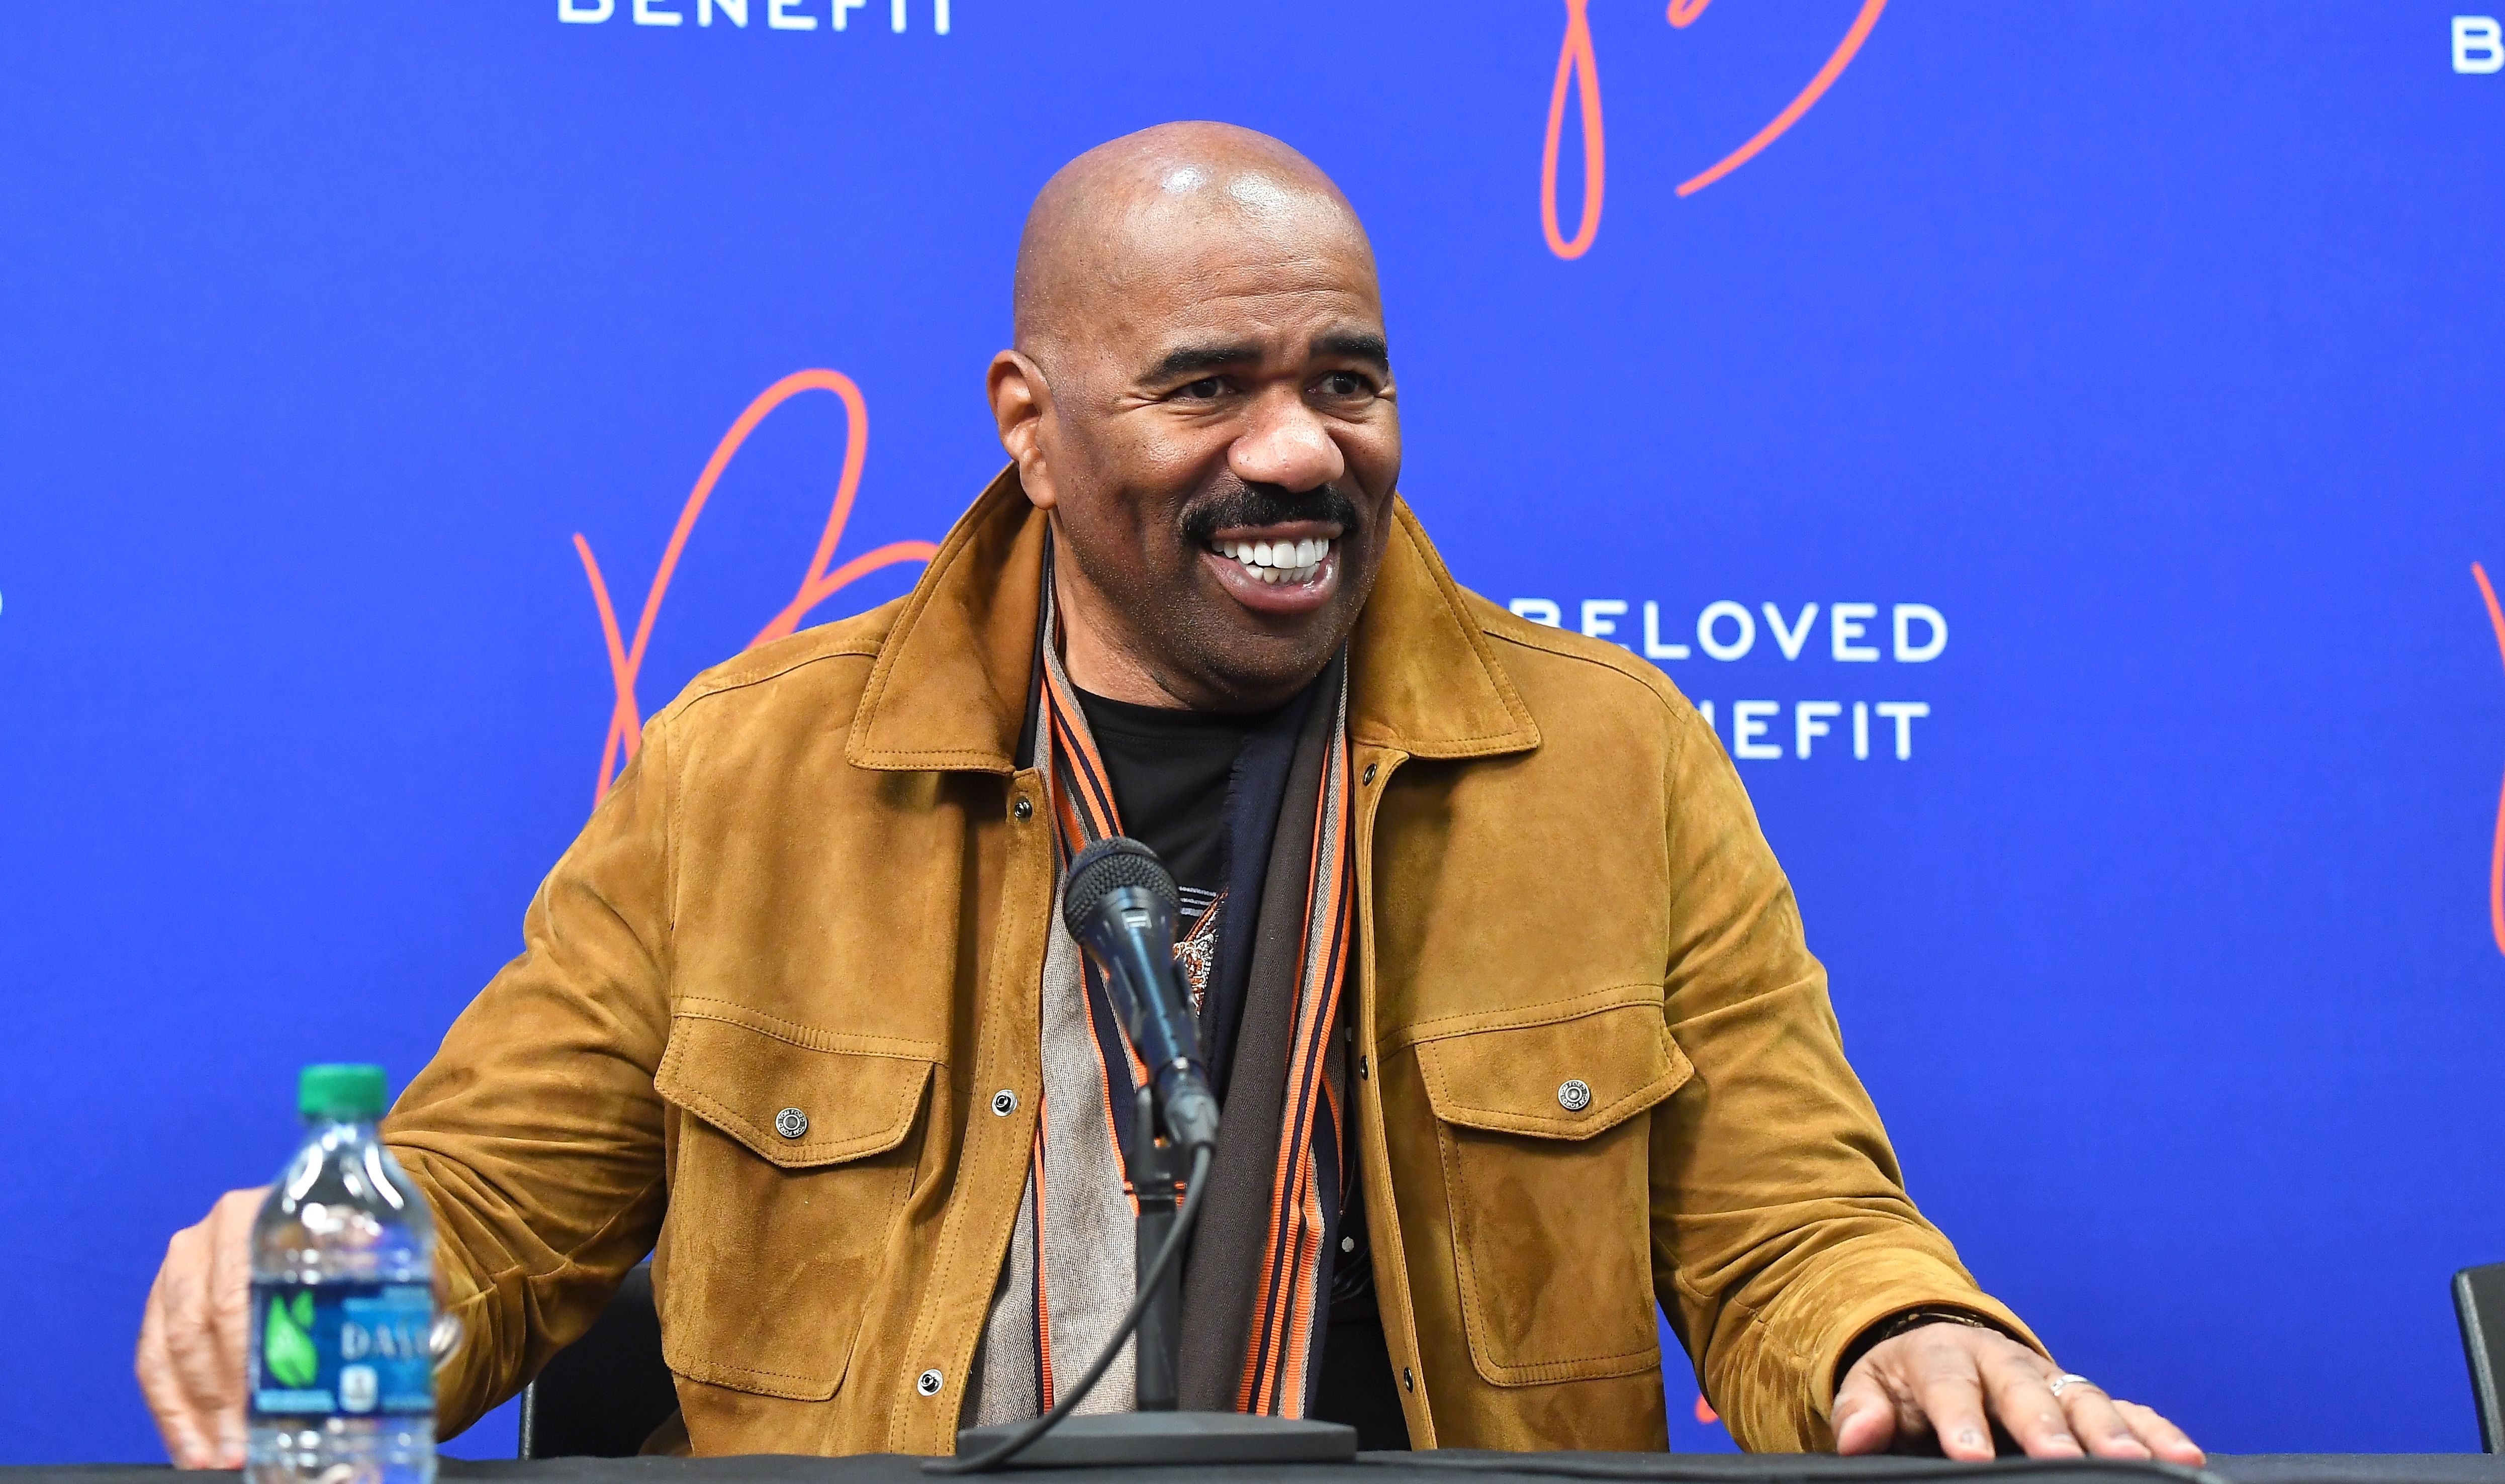 Steve Harvey during the 2019 Beloved Benefit at Mercedes-Benz Stadium on March 21, 2019 in Atlanta, Georgia. | Source: Getty Images